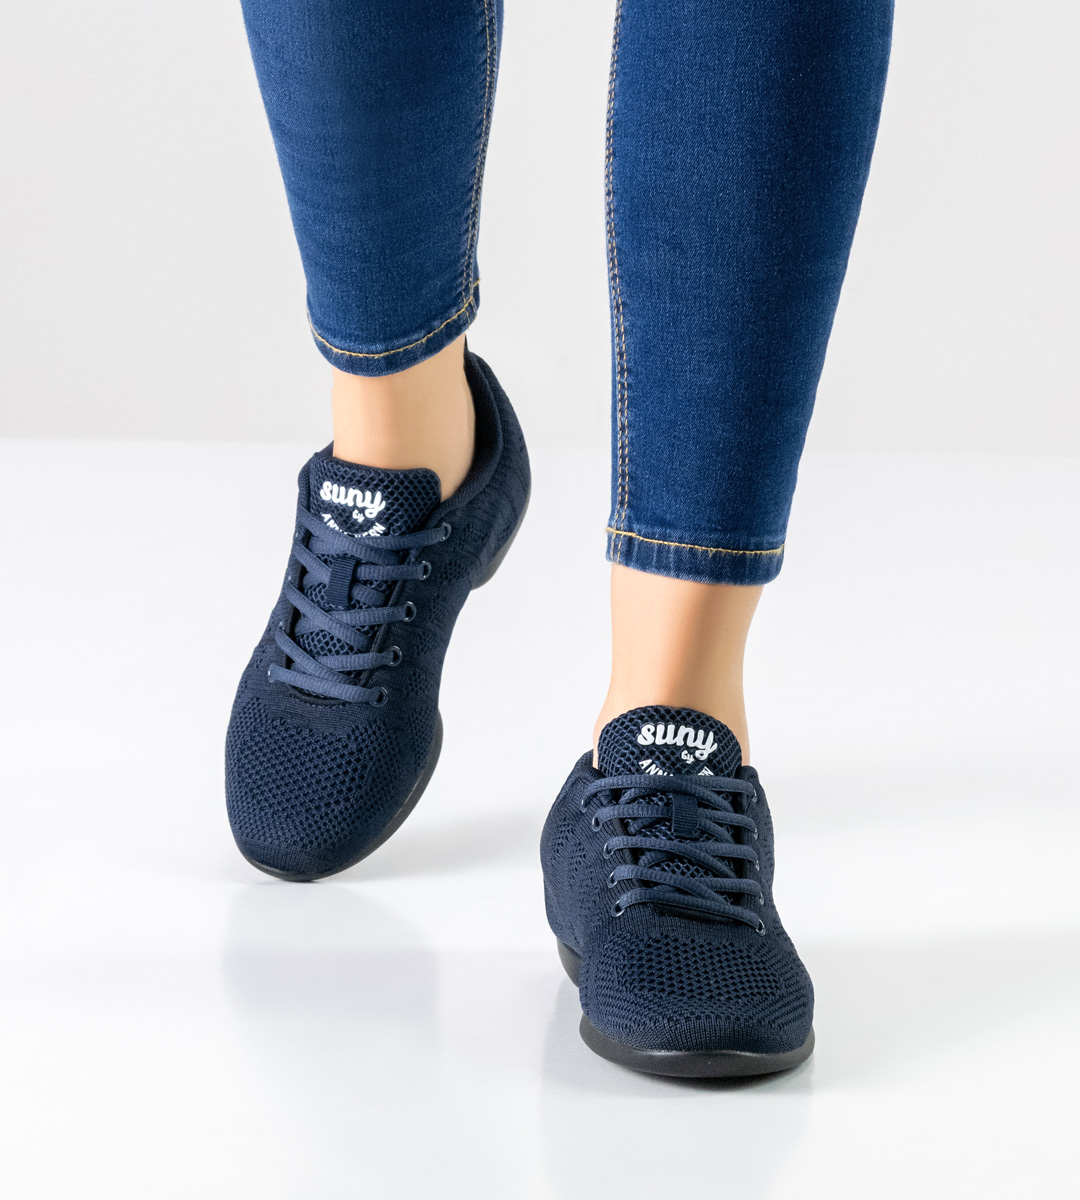 Blue jeans in combination with blue Suny women's dance sneakers for training